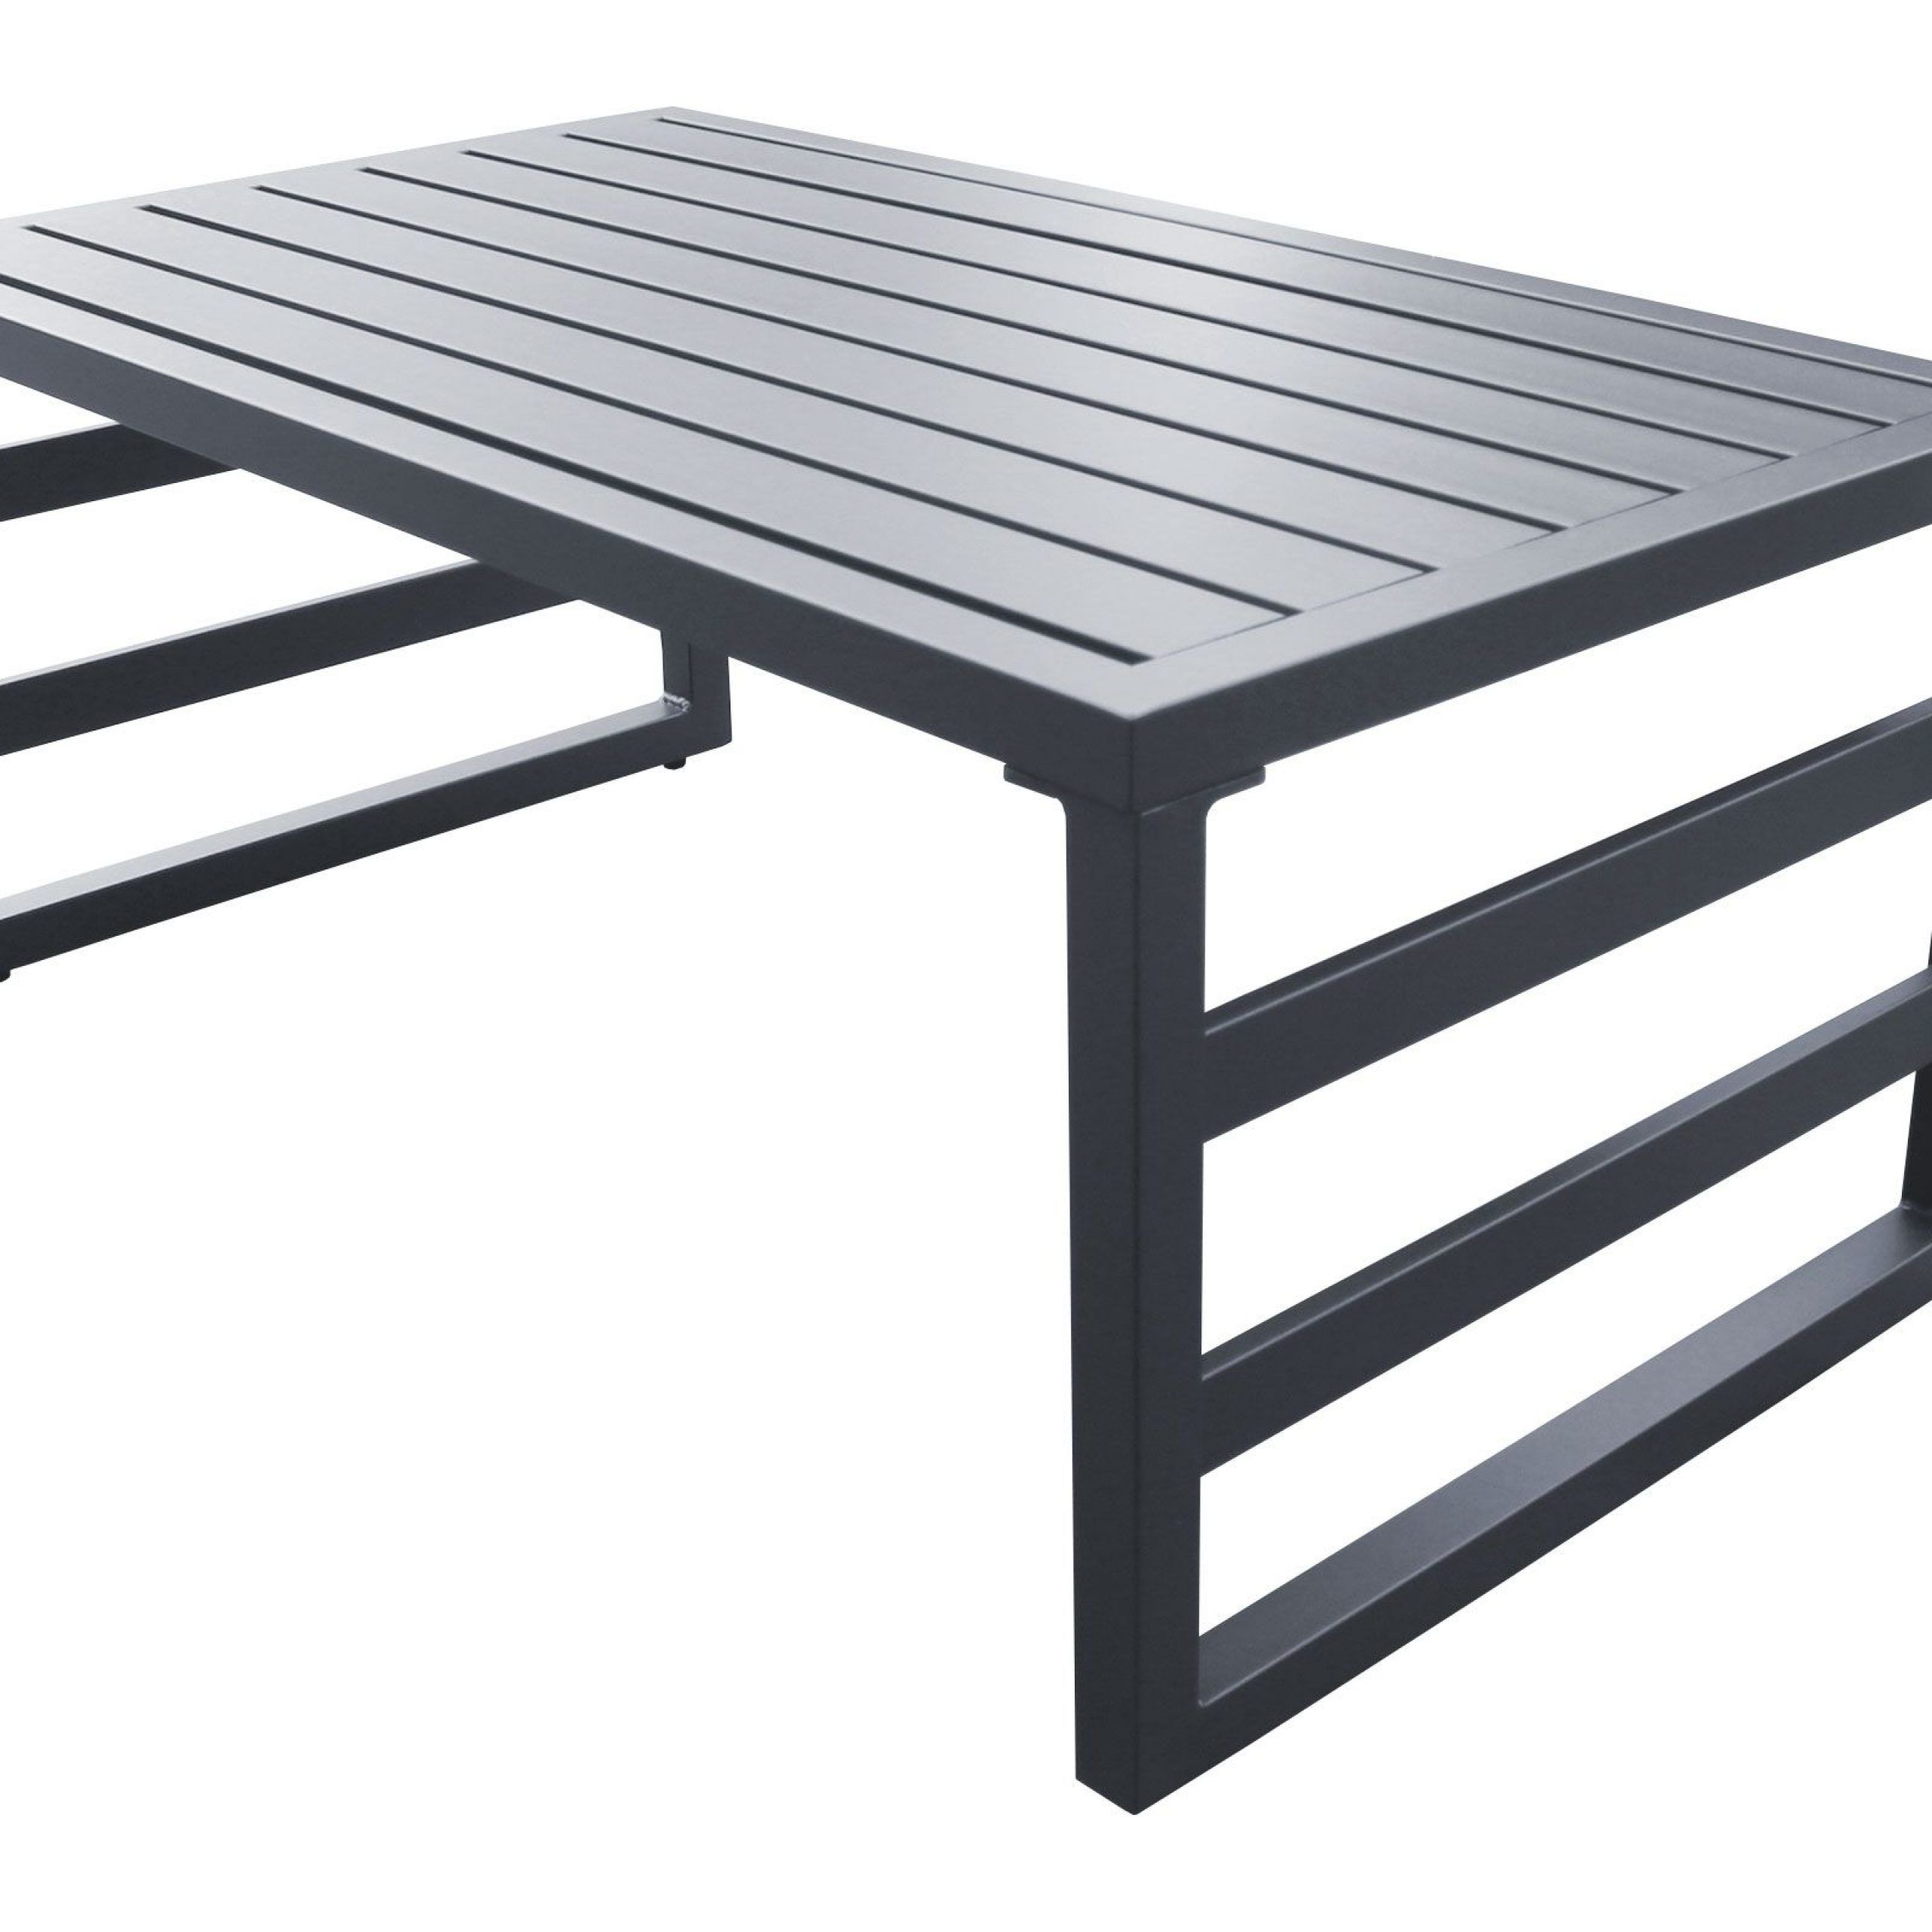 Aluminum Outdoor Furniture – 5 Piece Set | Design Within 5 Piece Coffee Tables (View 10 of 15)